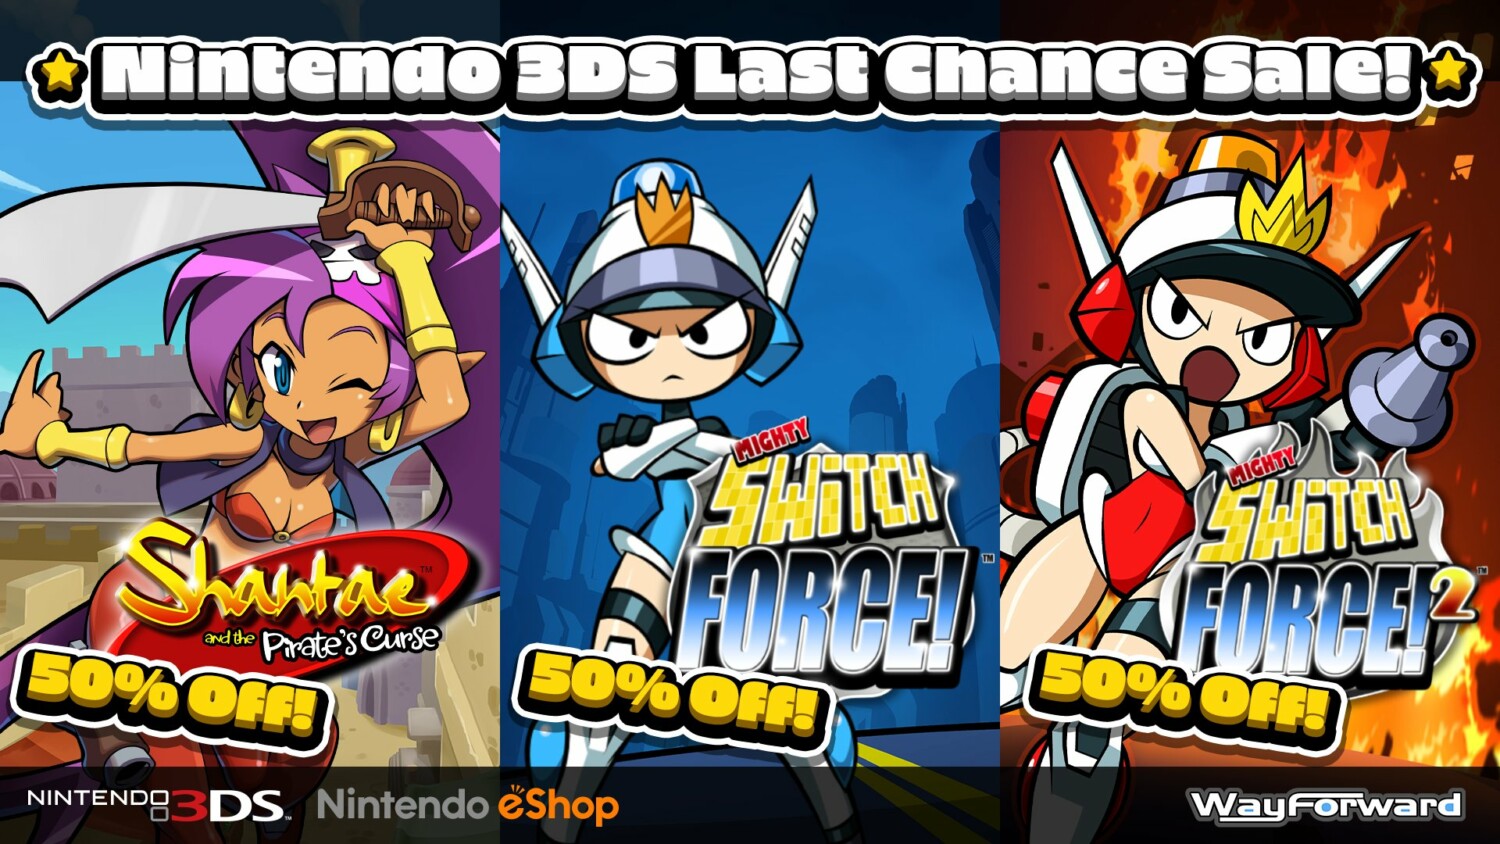 Nintendo 3DS and Wii U eShop shutdown - Last chance to buy 3DS and